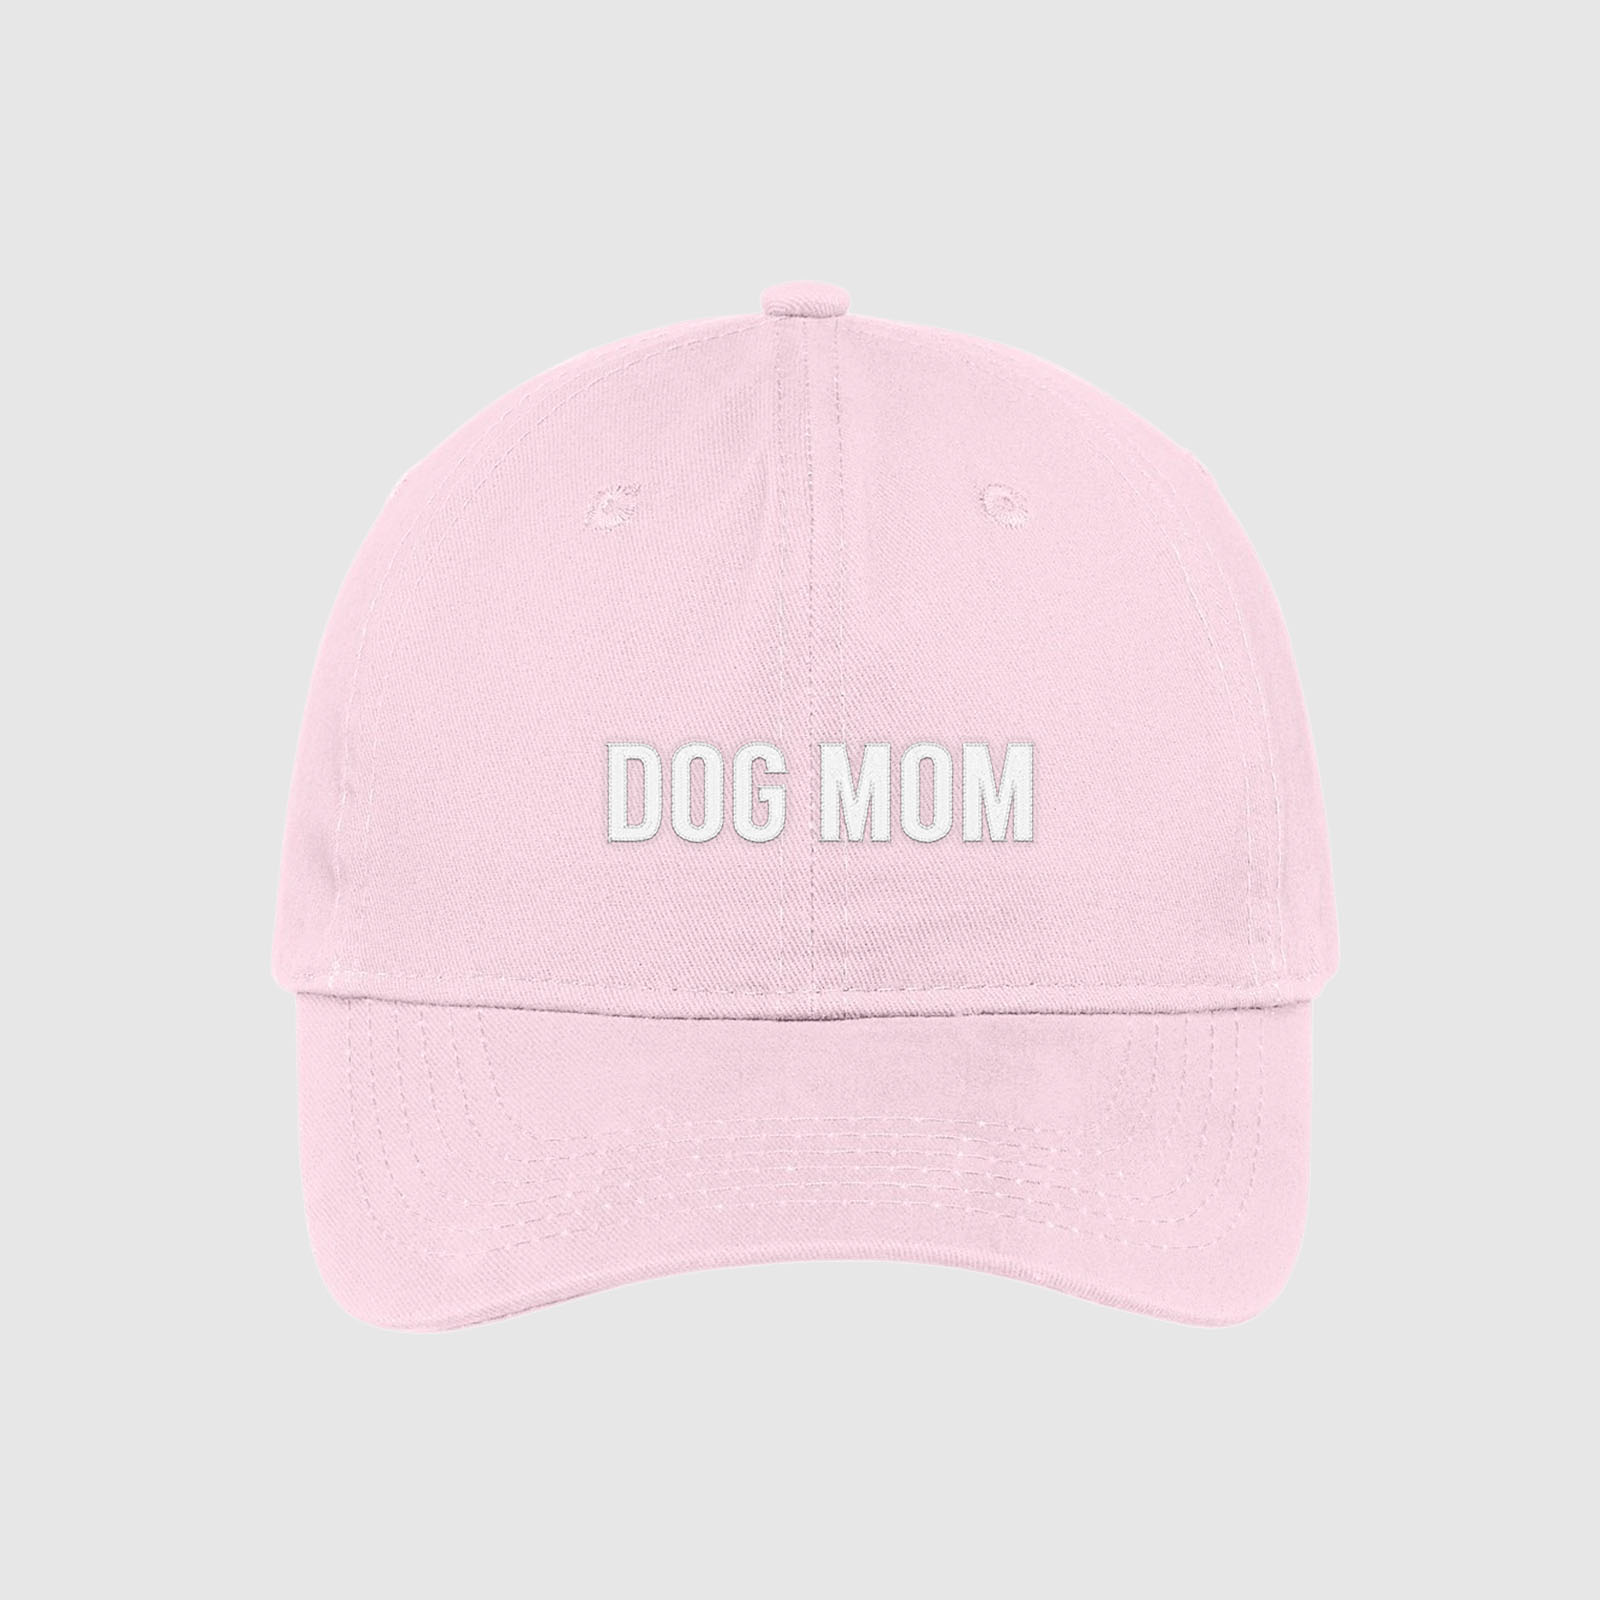 Blush pink Dog Mom Hat embroidered with white text.